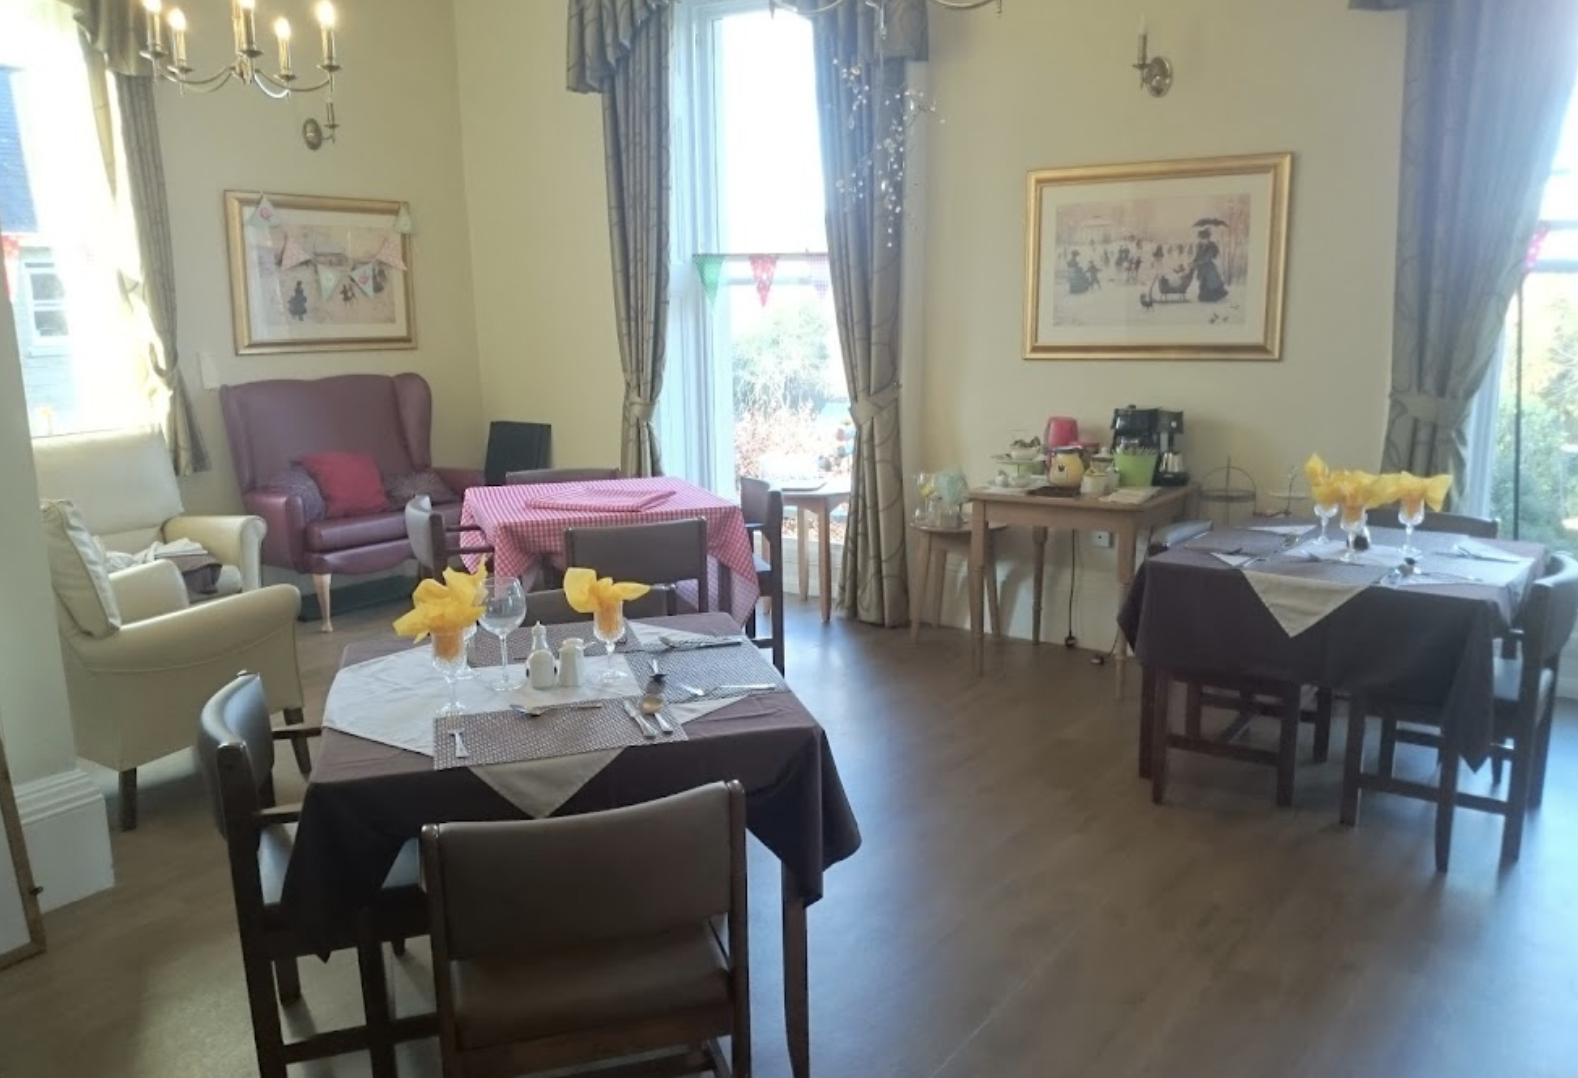 Dining room of Cleveland House care home in Huddersfield, West Yorkshire